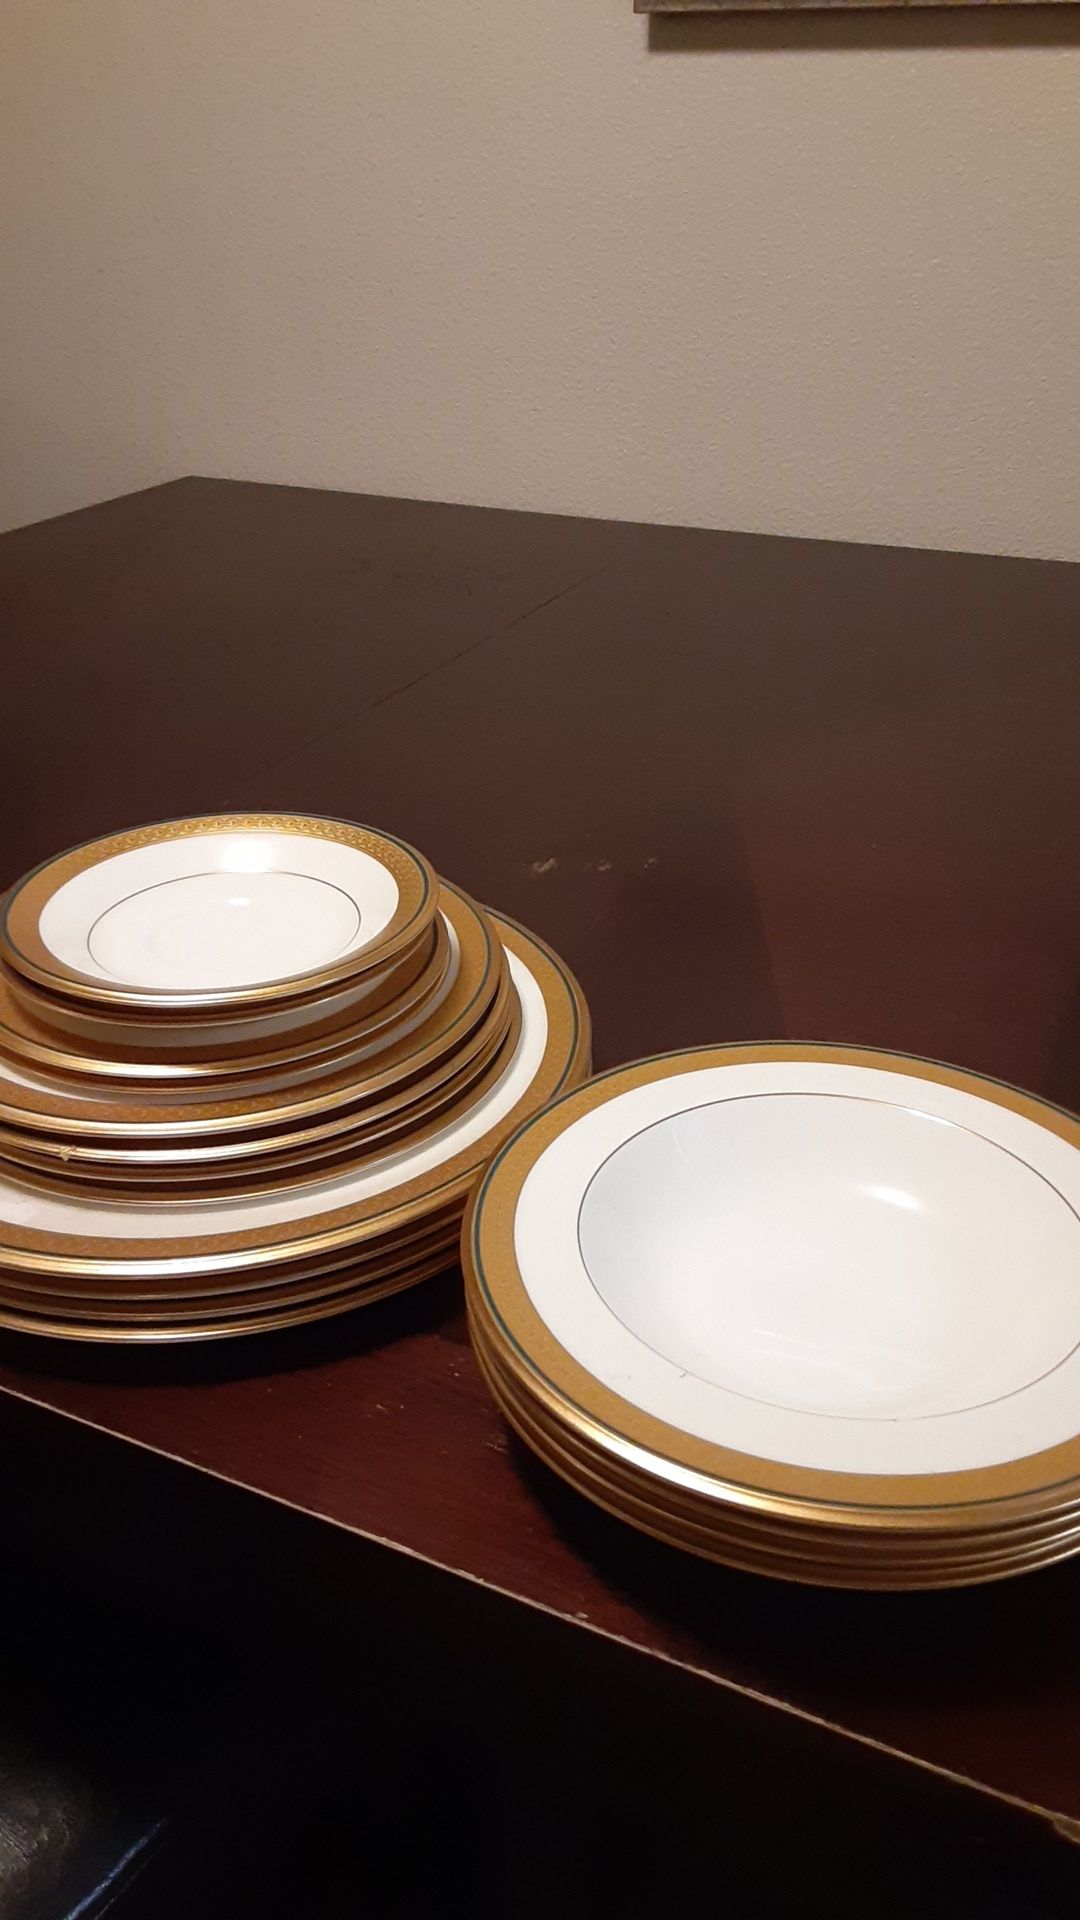 Gold rimmed dishes